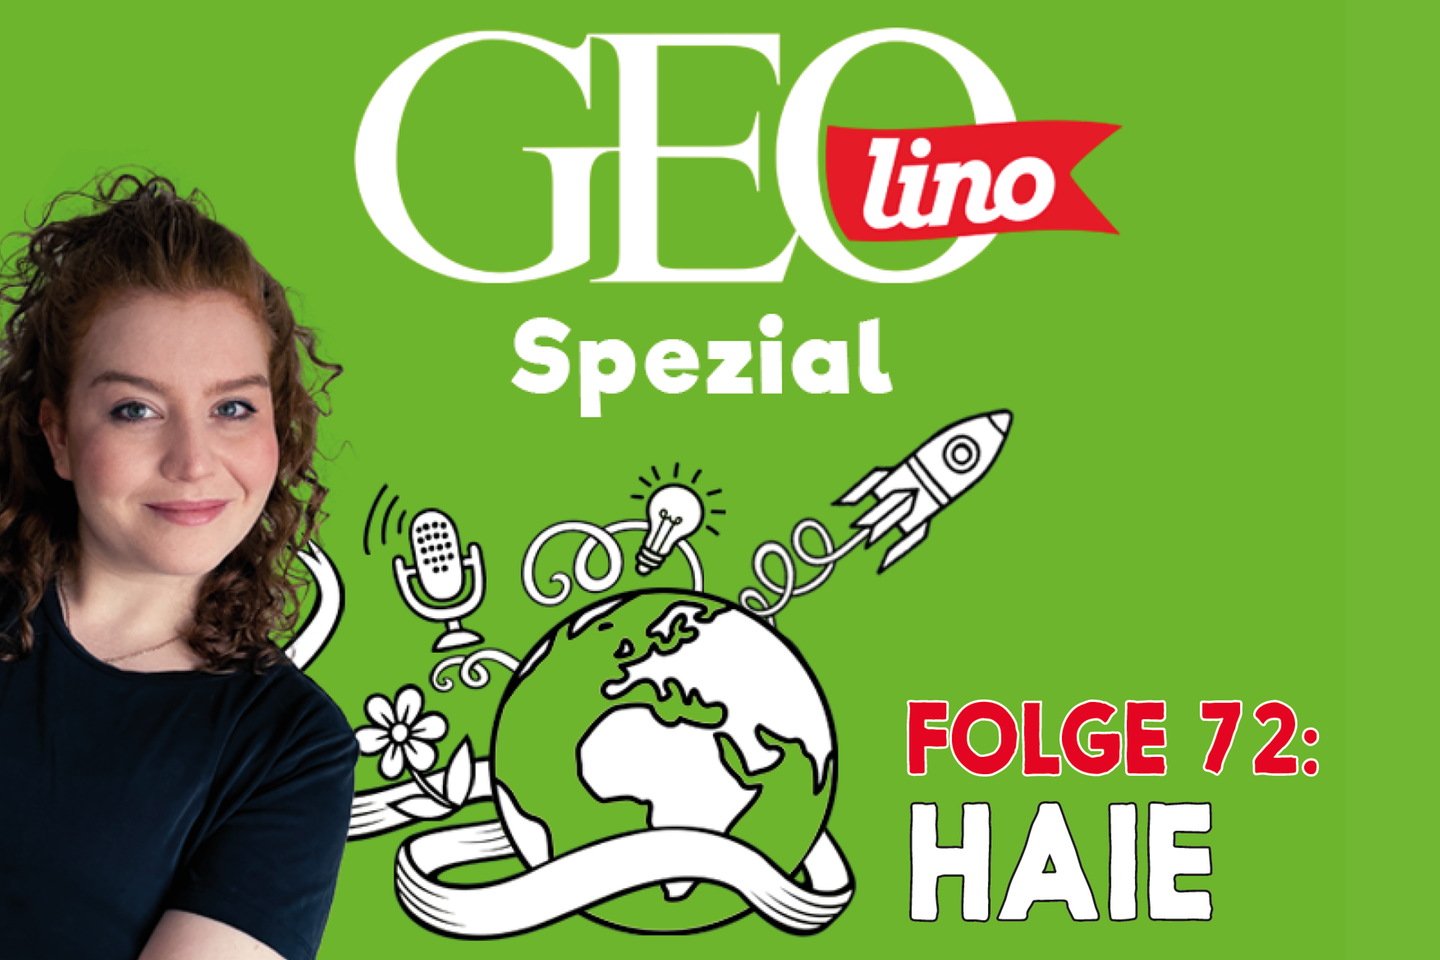 In Folge 72 unseres GEOlino-Podcasts geht's um Haie